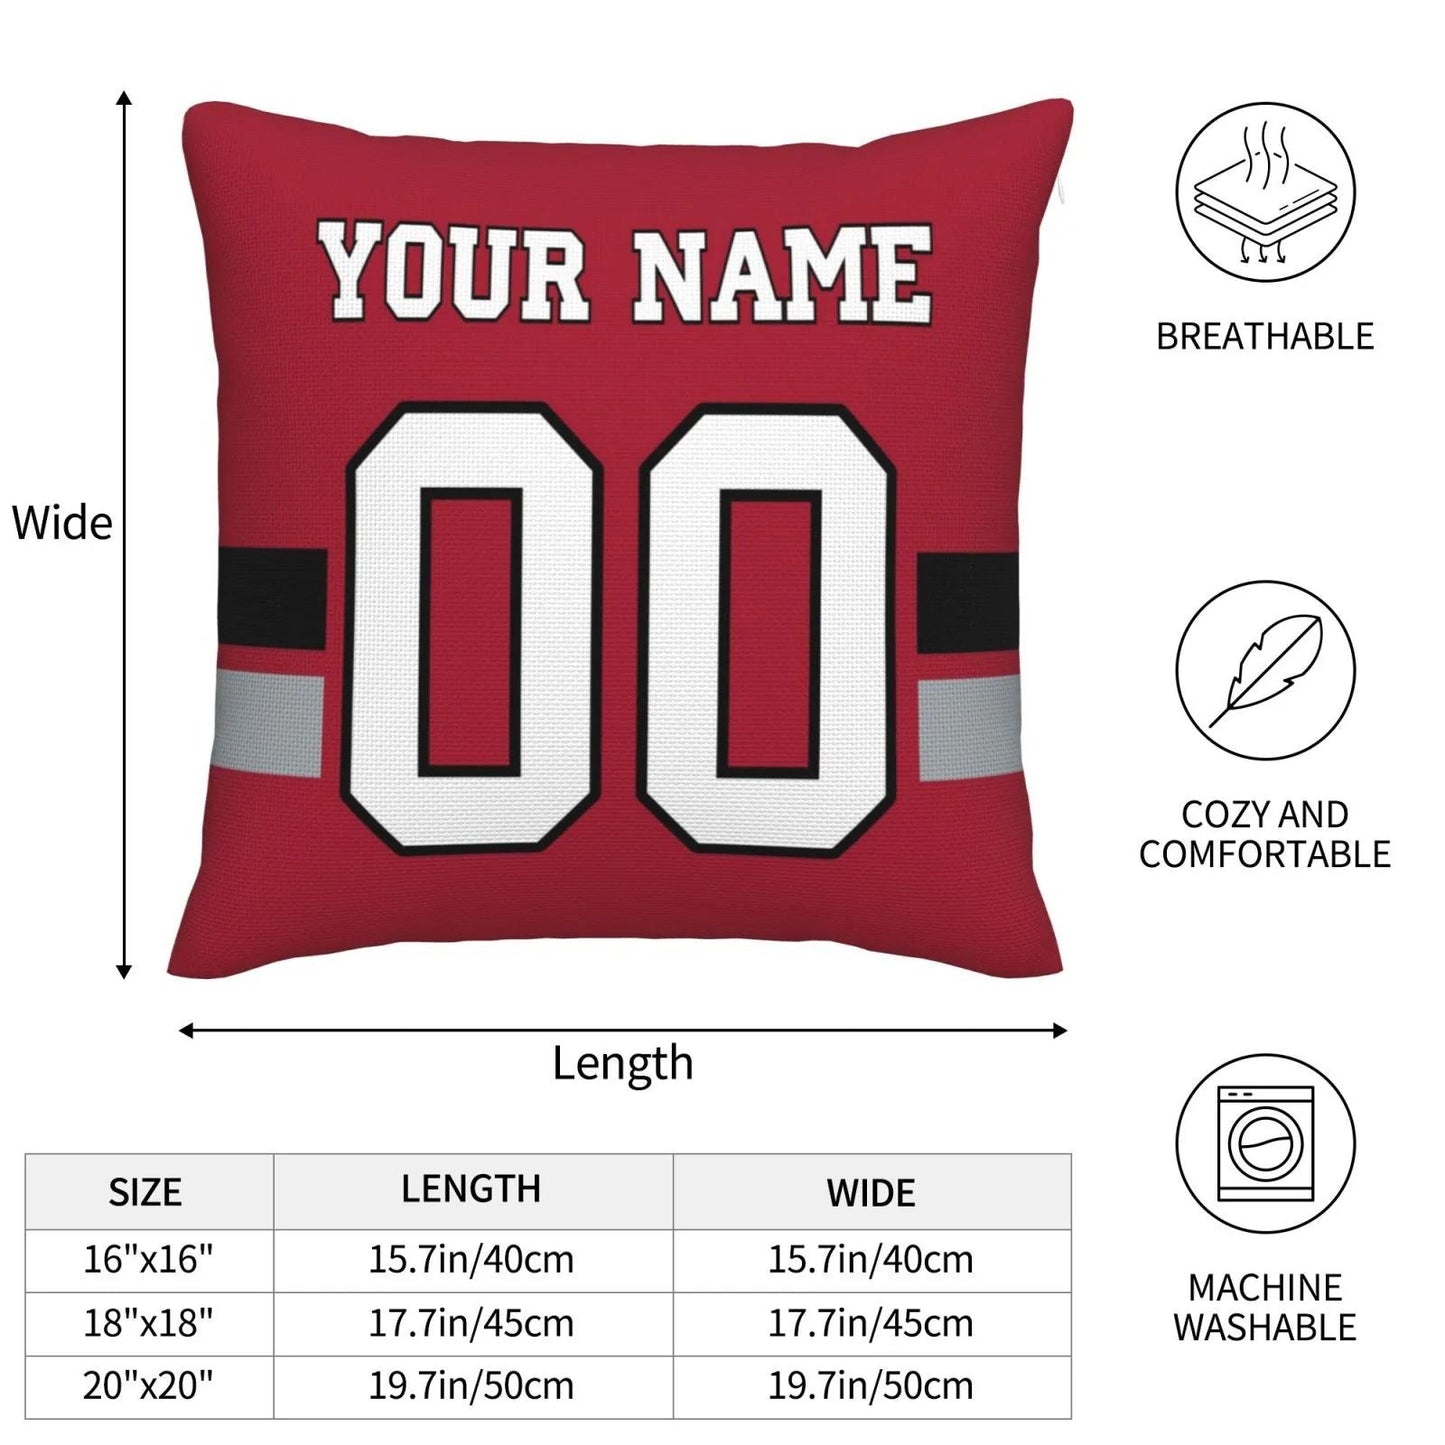 Custom A.Falcons Pillow Decorative Throw Pillow Case - Print Personalized Football Team Fans Name & Number Birthday Gift Football Pillows